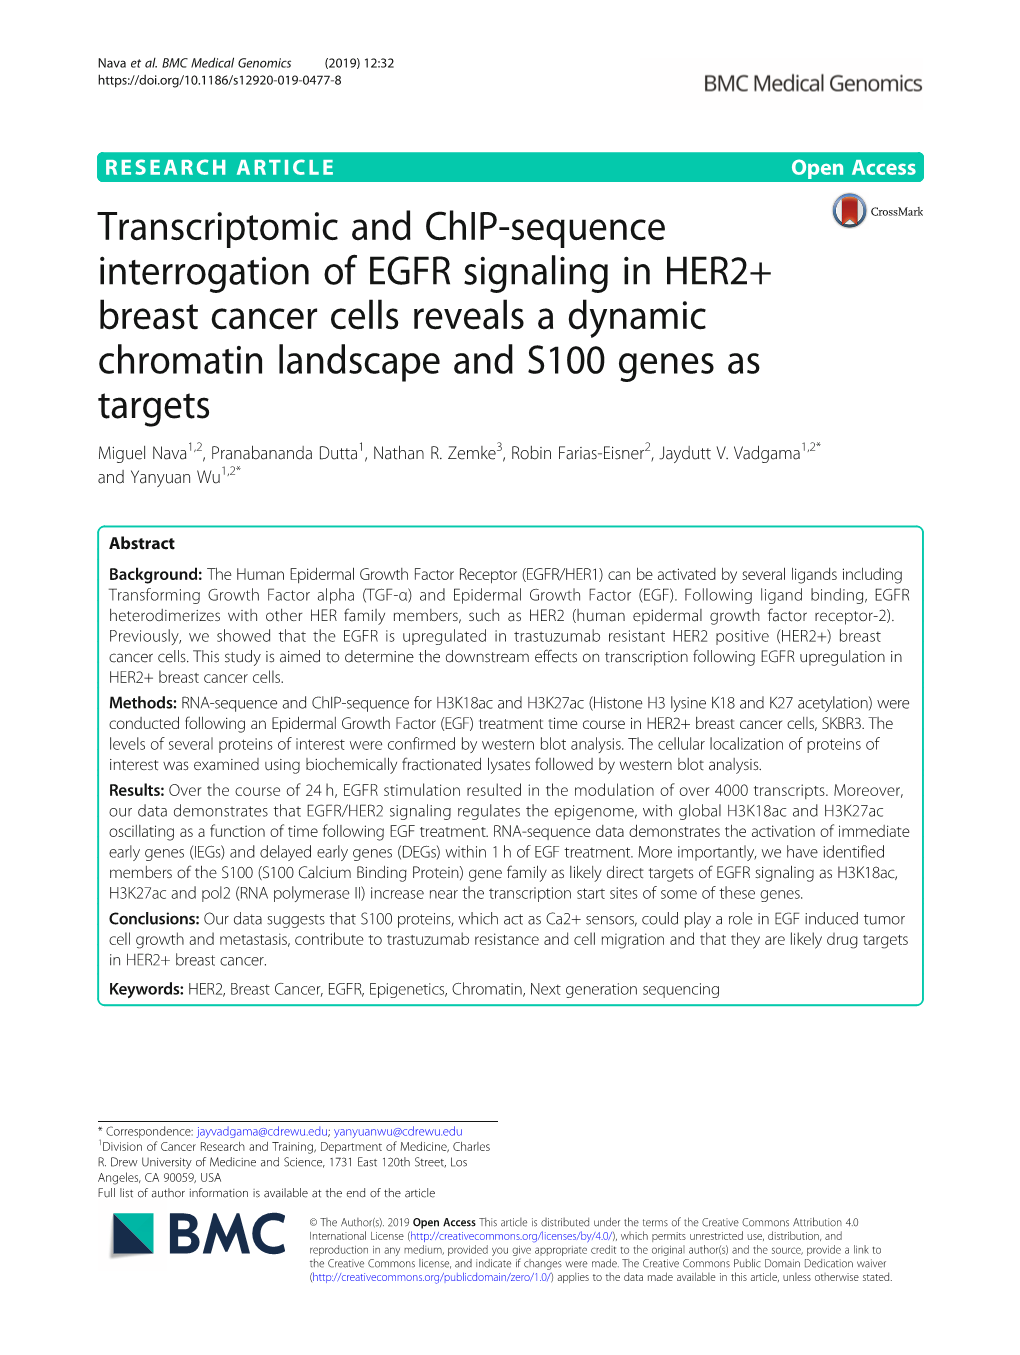 Transcriptomic and Chip-Sequence Interrogation of EGFR Signaling In